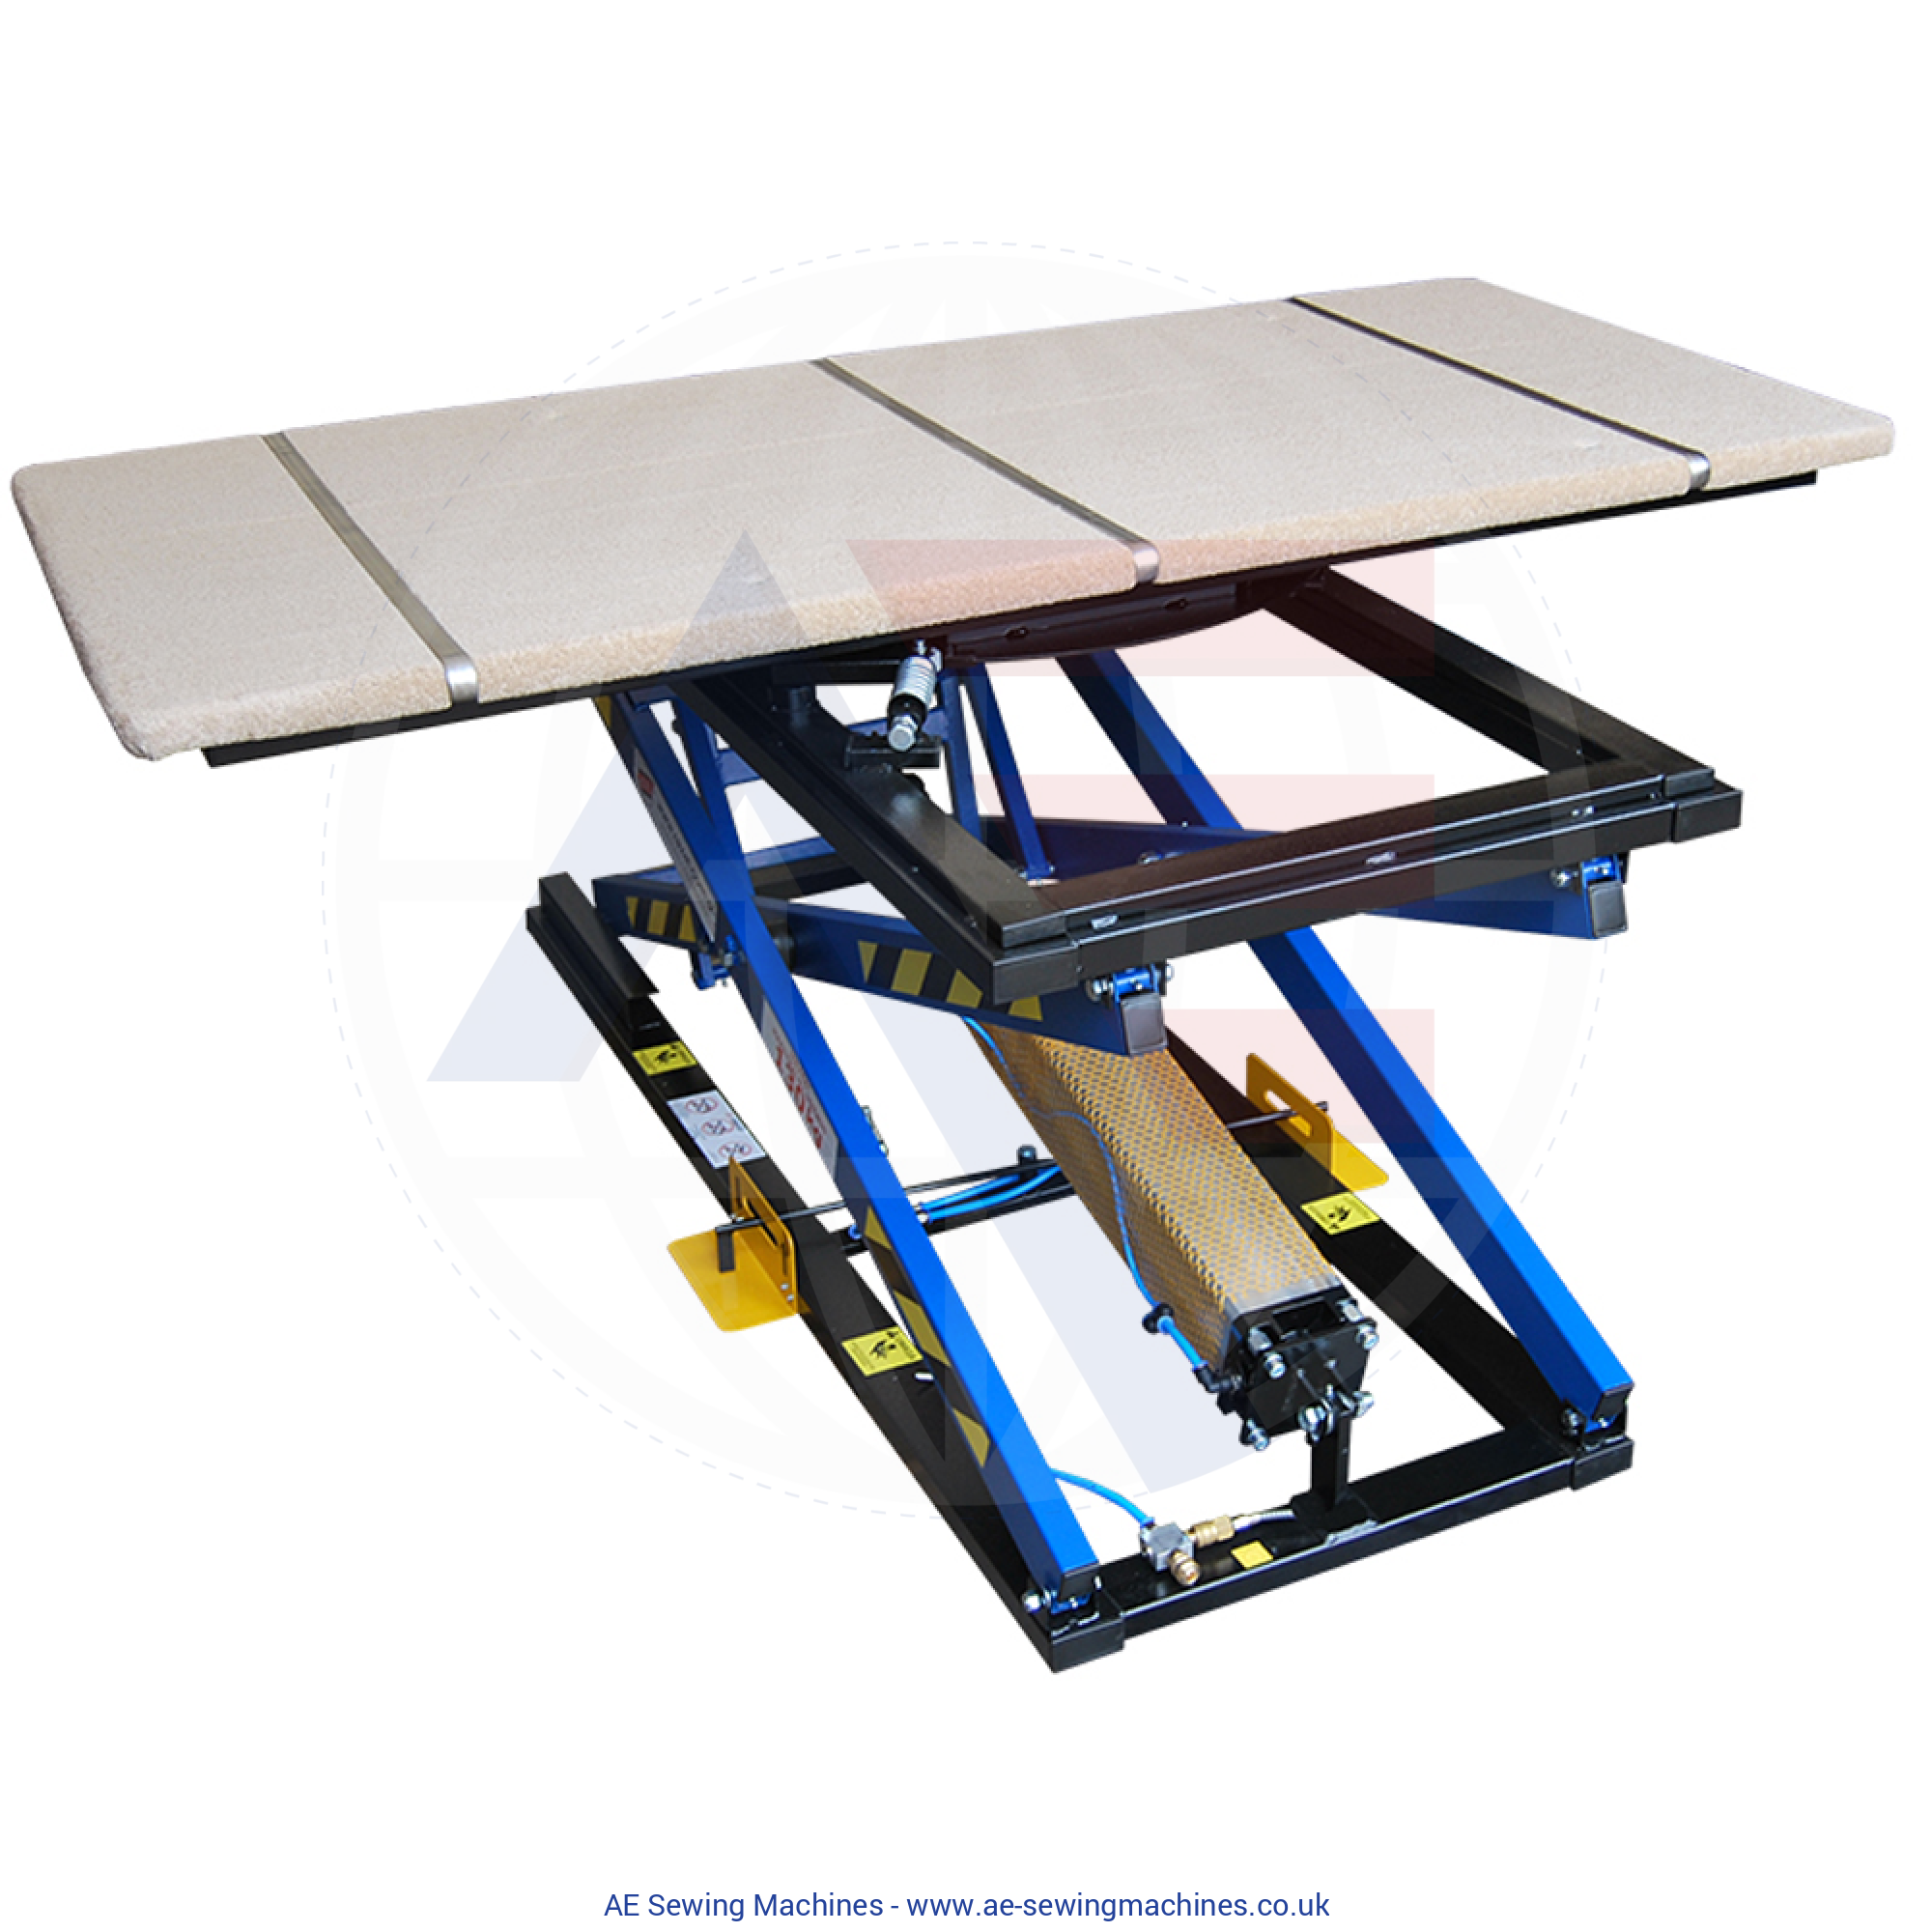 Rexel St-3/O Pneumatic Lifting Table Tables